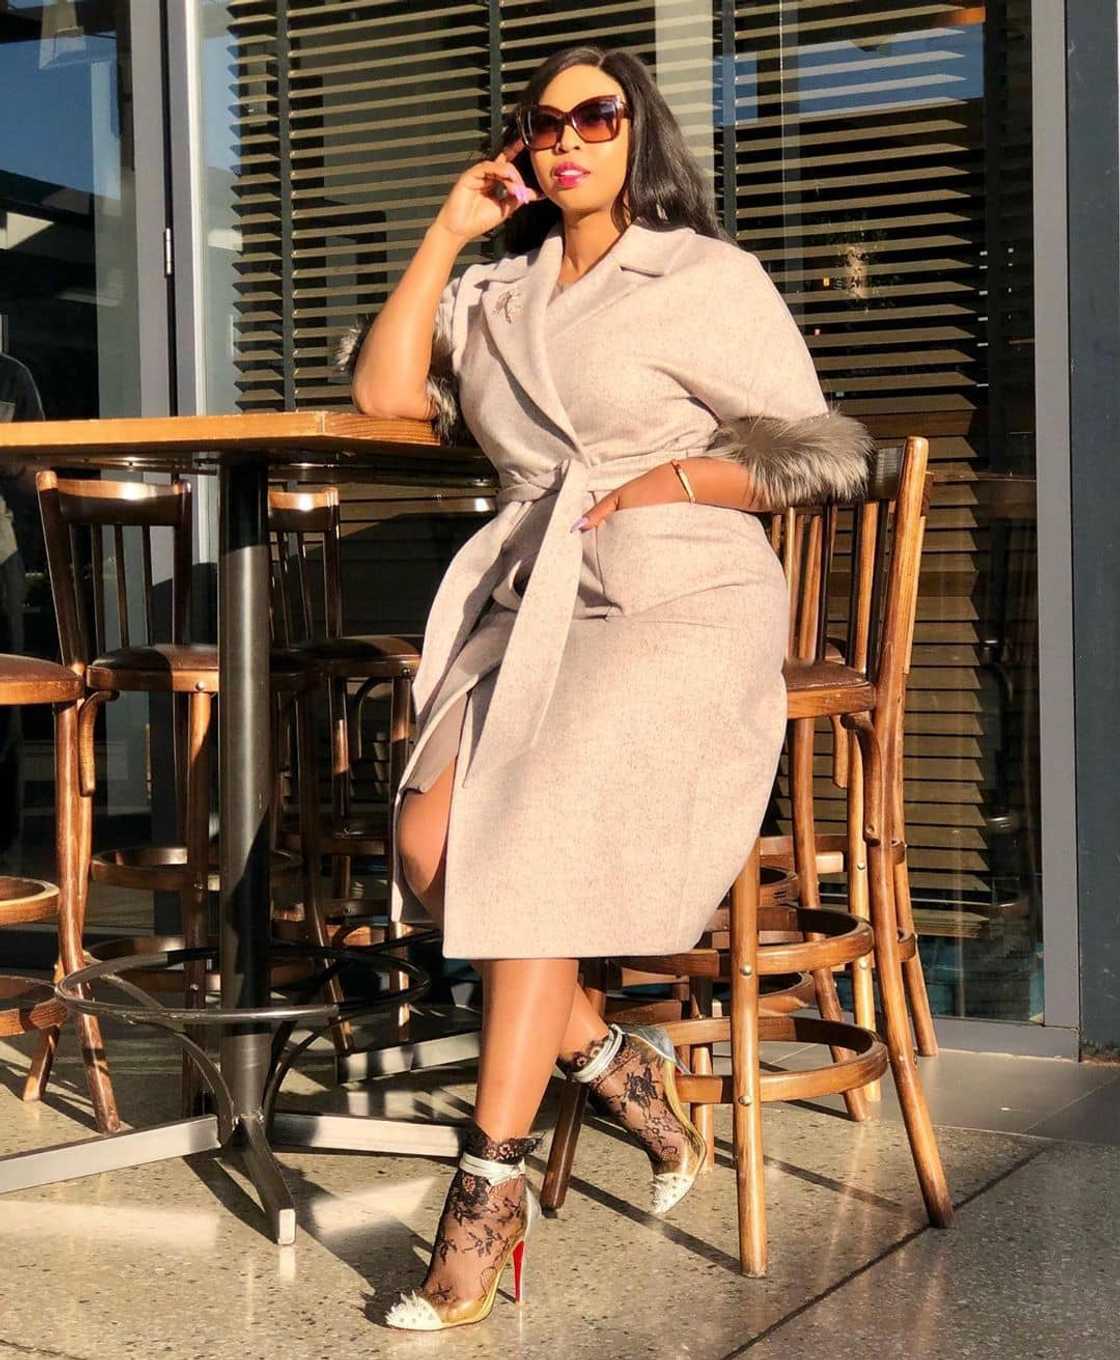 Ayanda Ncwane age, spouse, wedding, book, pictures and Instagram